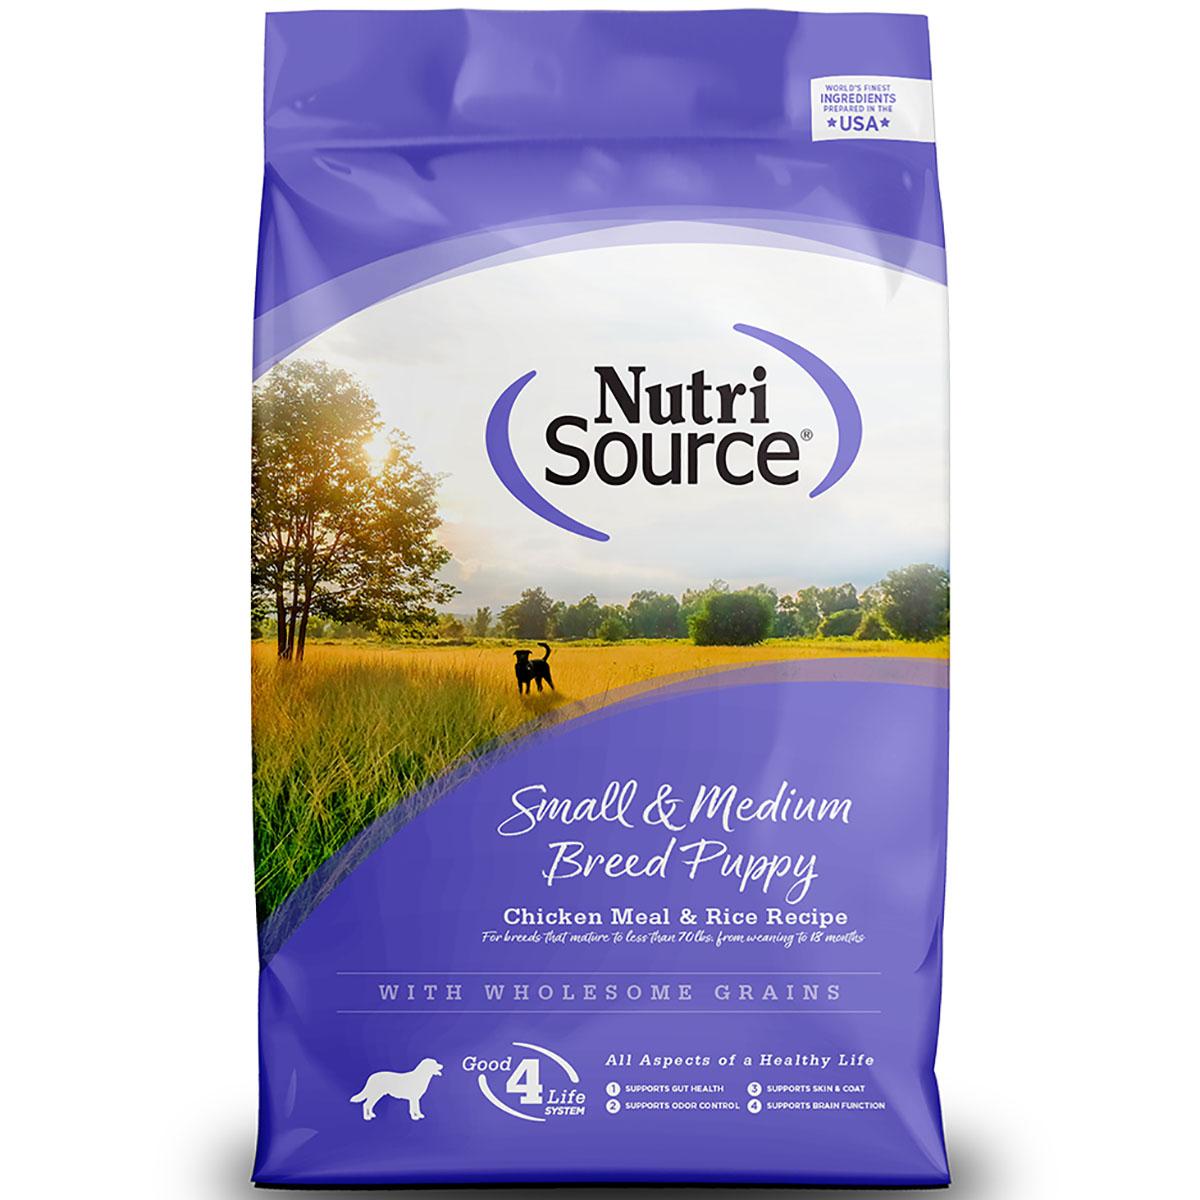 nutrisource-small-medium-breed-puppy-chicken-meal-rice-recipe-dry-dog-food